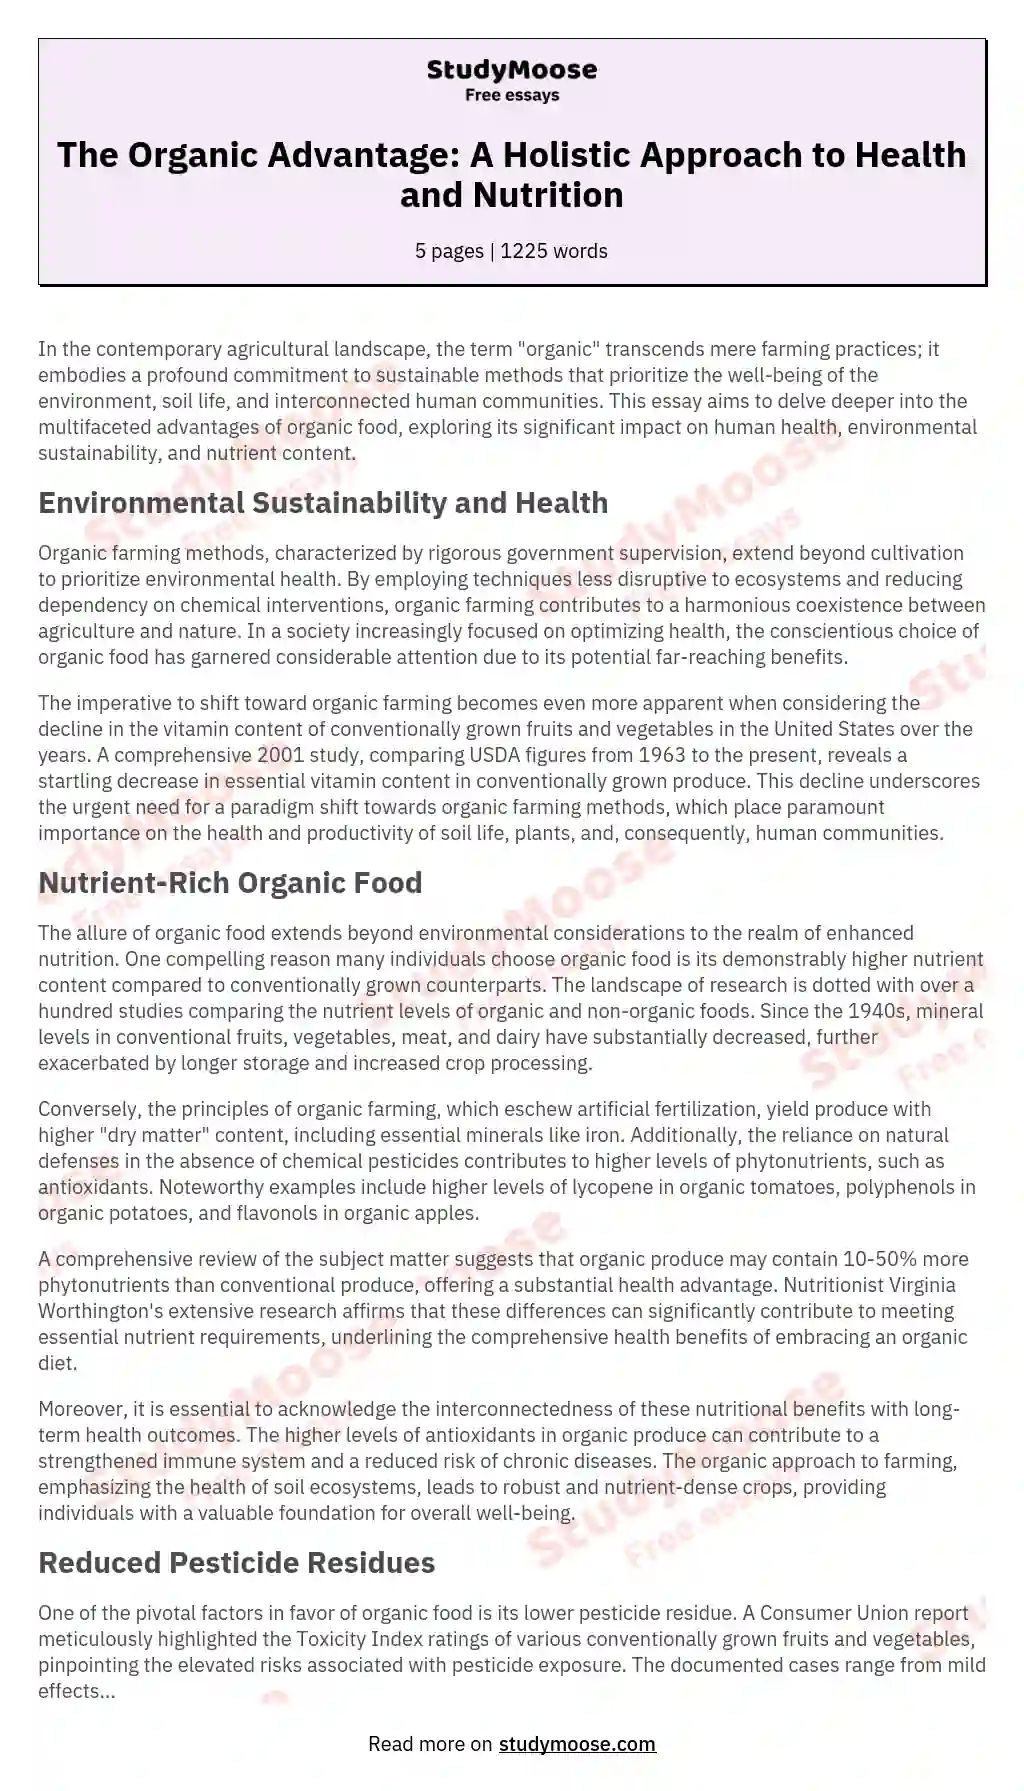 The Organic Advantage: A Holistic Approach to Health and Nutrition essay